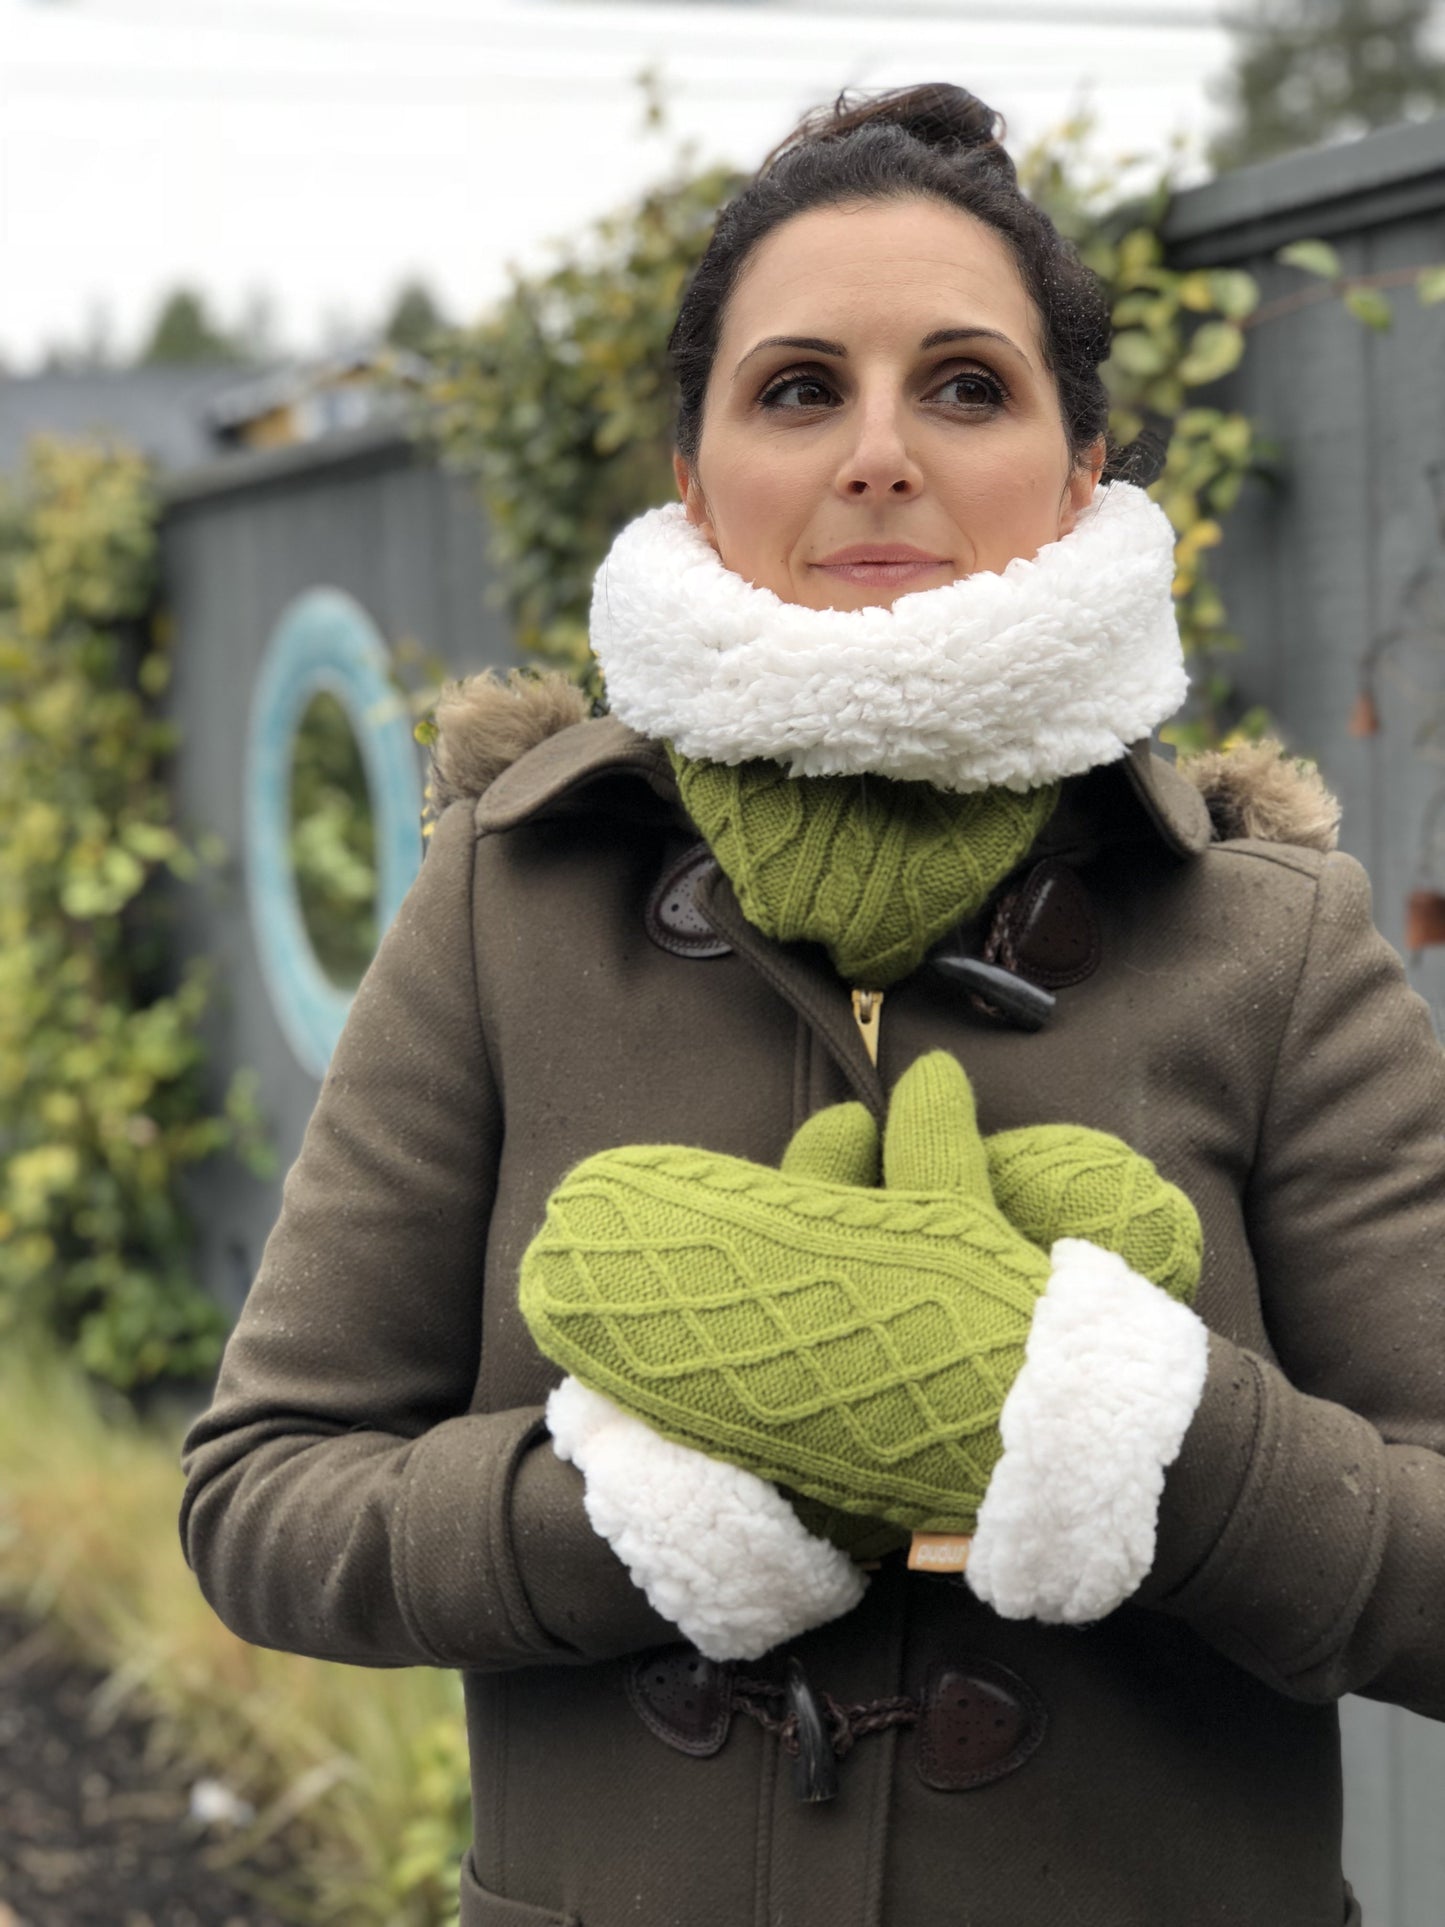  Pudus Cable Knit Winter Infinity Scarf, Fleece-Lined Neck Warmer Circle Snood Cable Knit Green - Snood